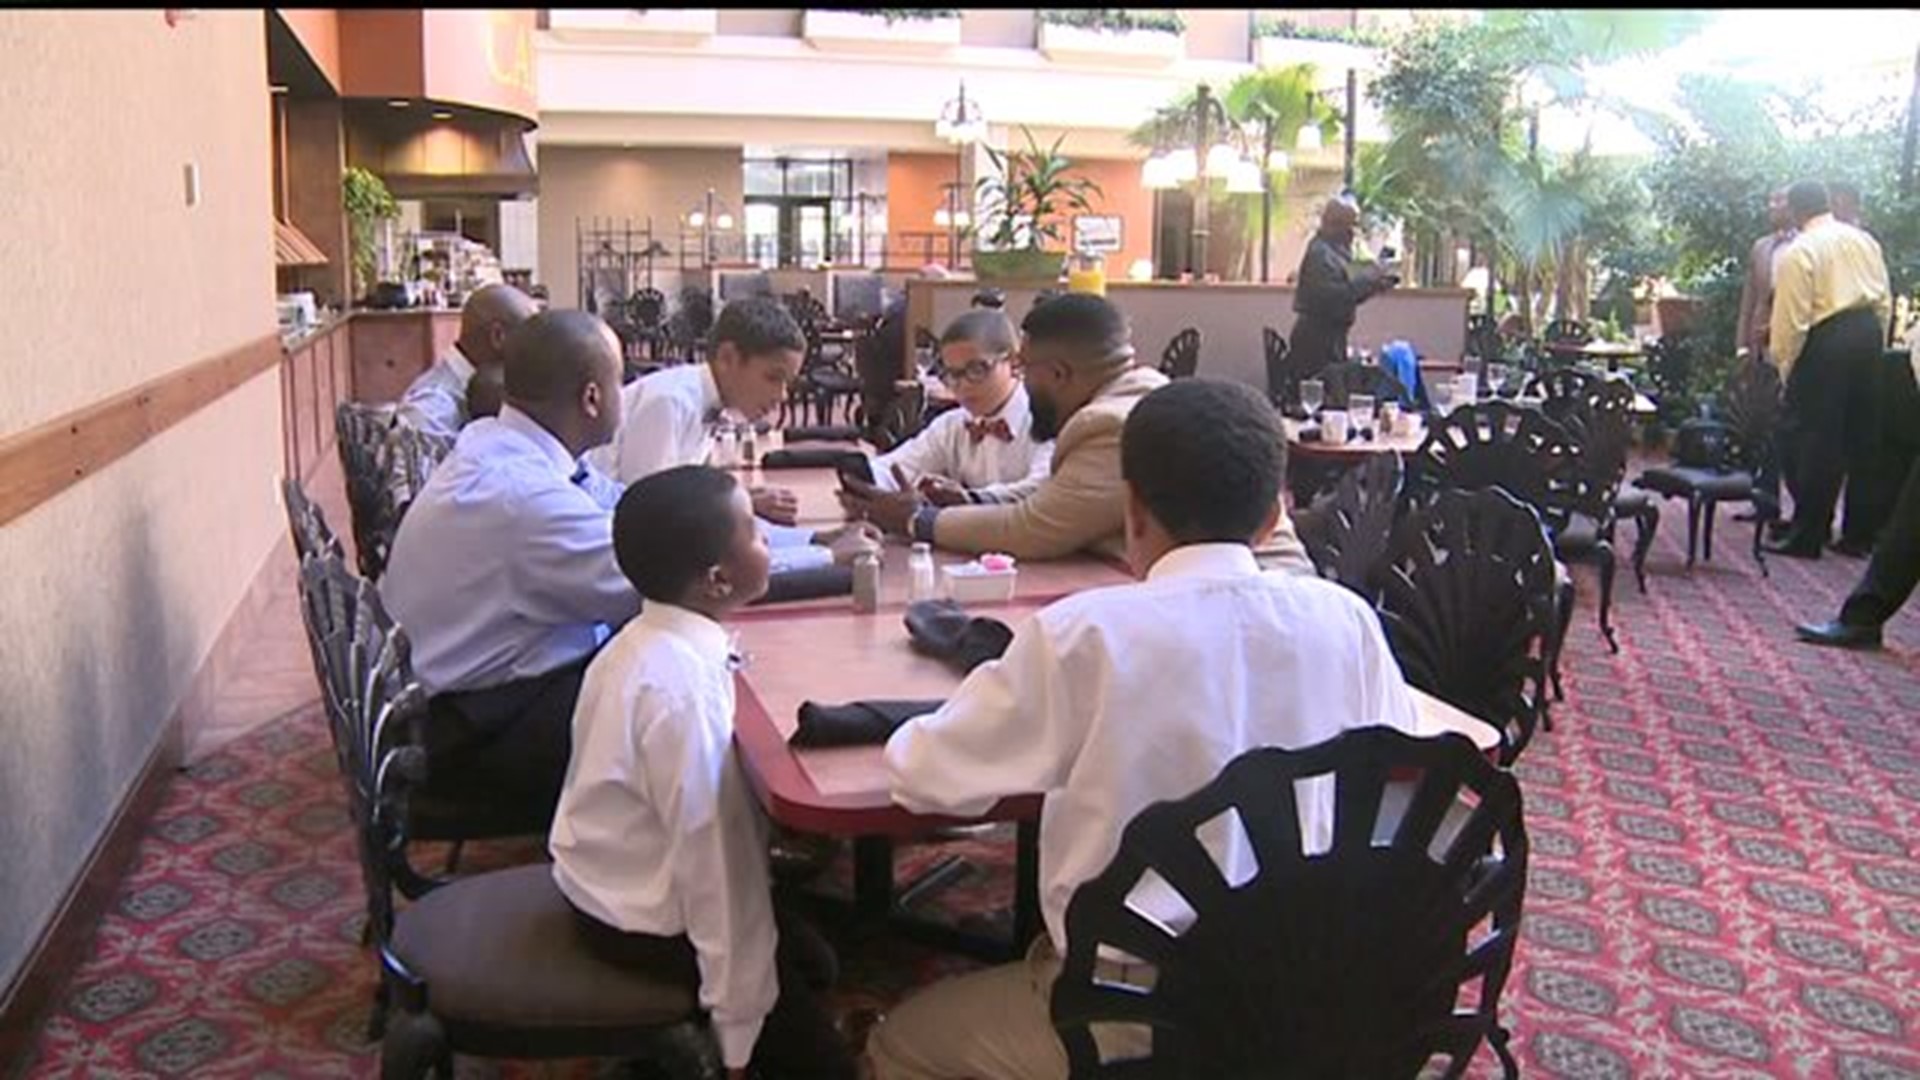 Bow tie brunch introduces bow ties to group of youngsters